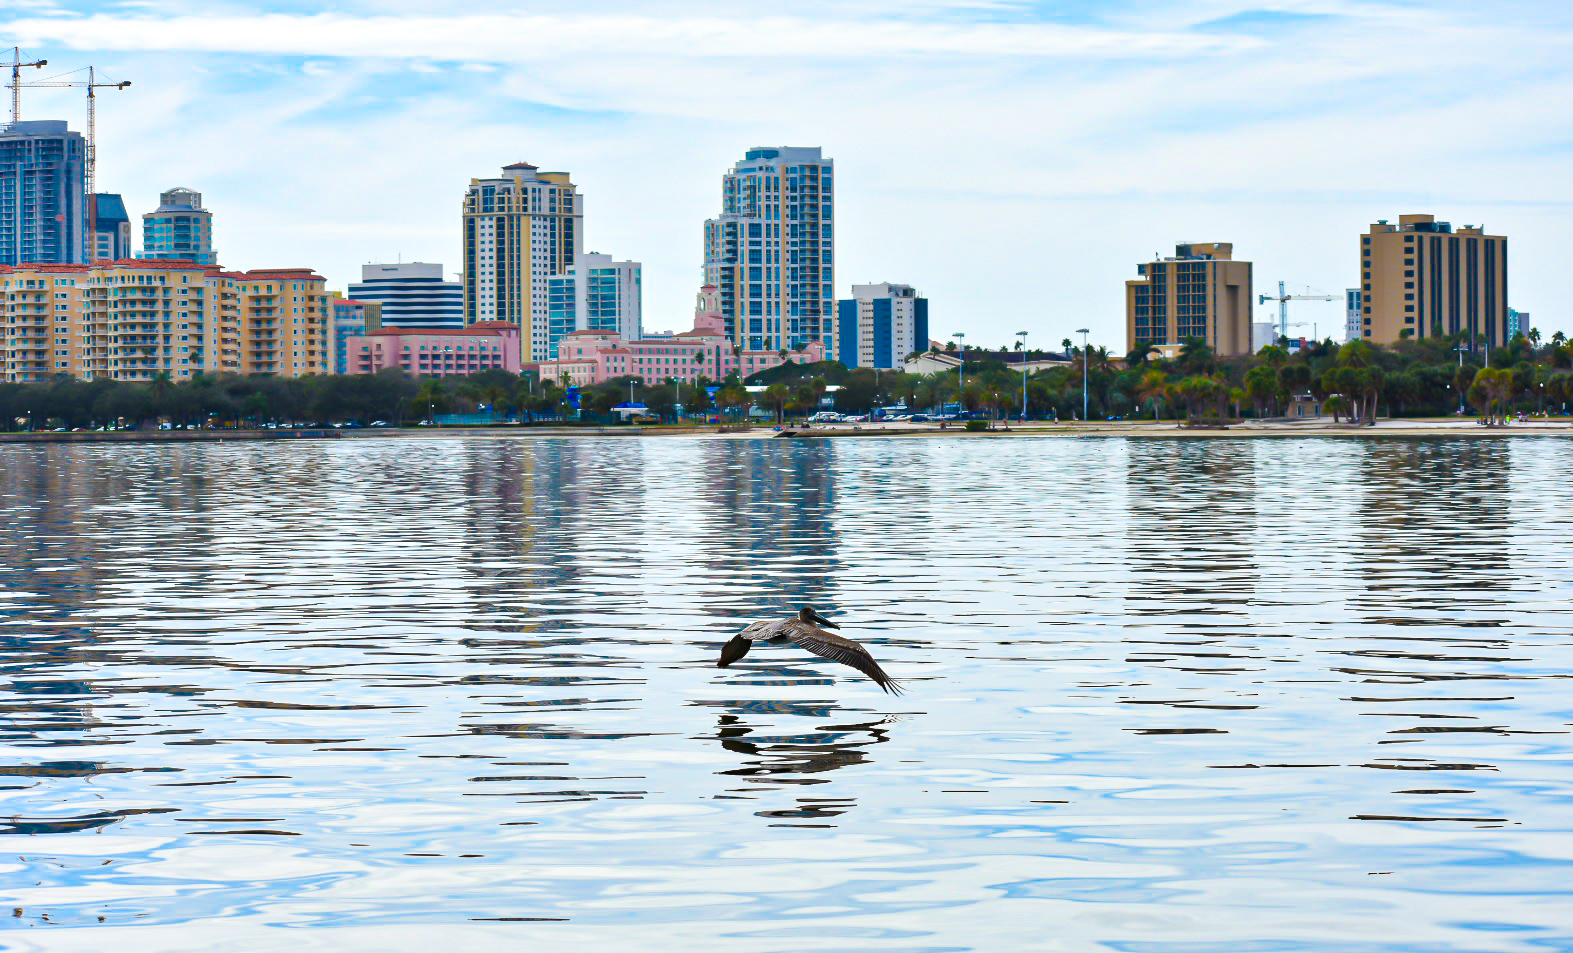 Downtown St. Petersburg viewed from the bay receives most of the City's investments, leaving a few districts impoverished. Photo by Richard Boore.